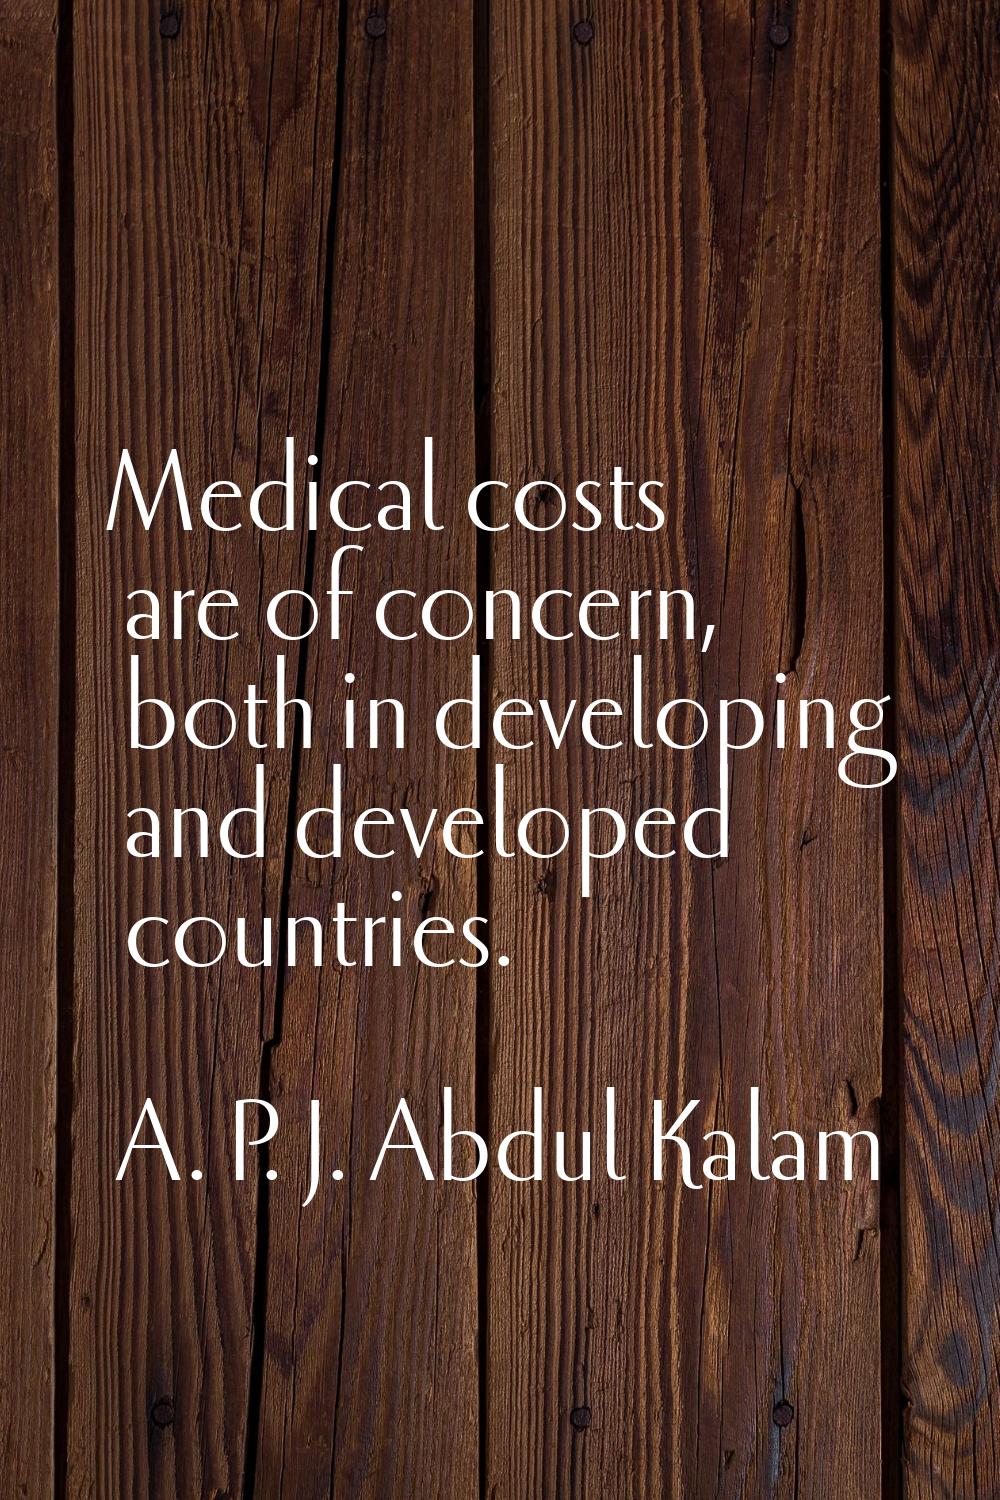 Medical costs are of concern, both in developing and developed countries.